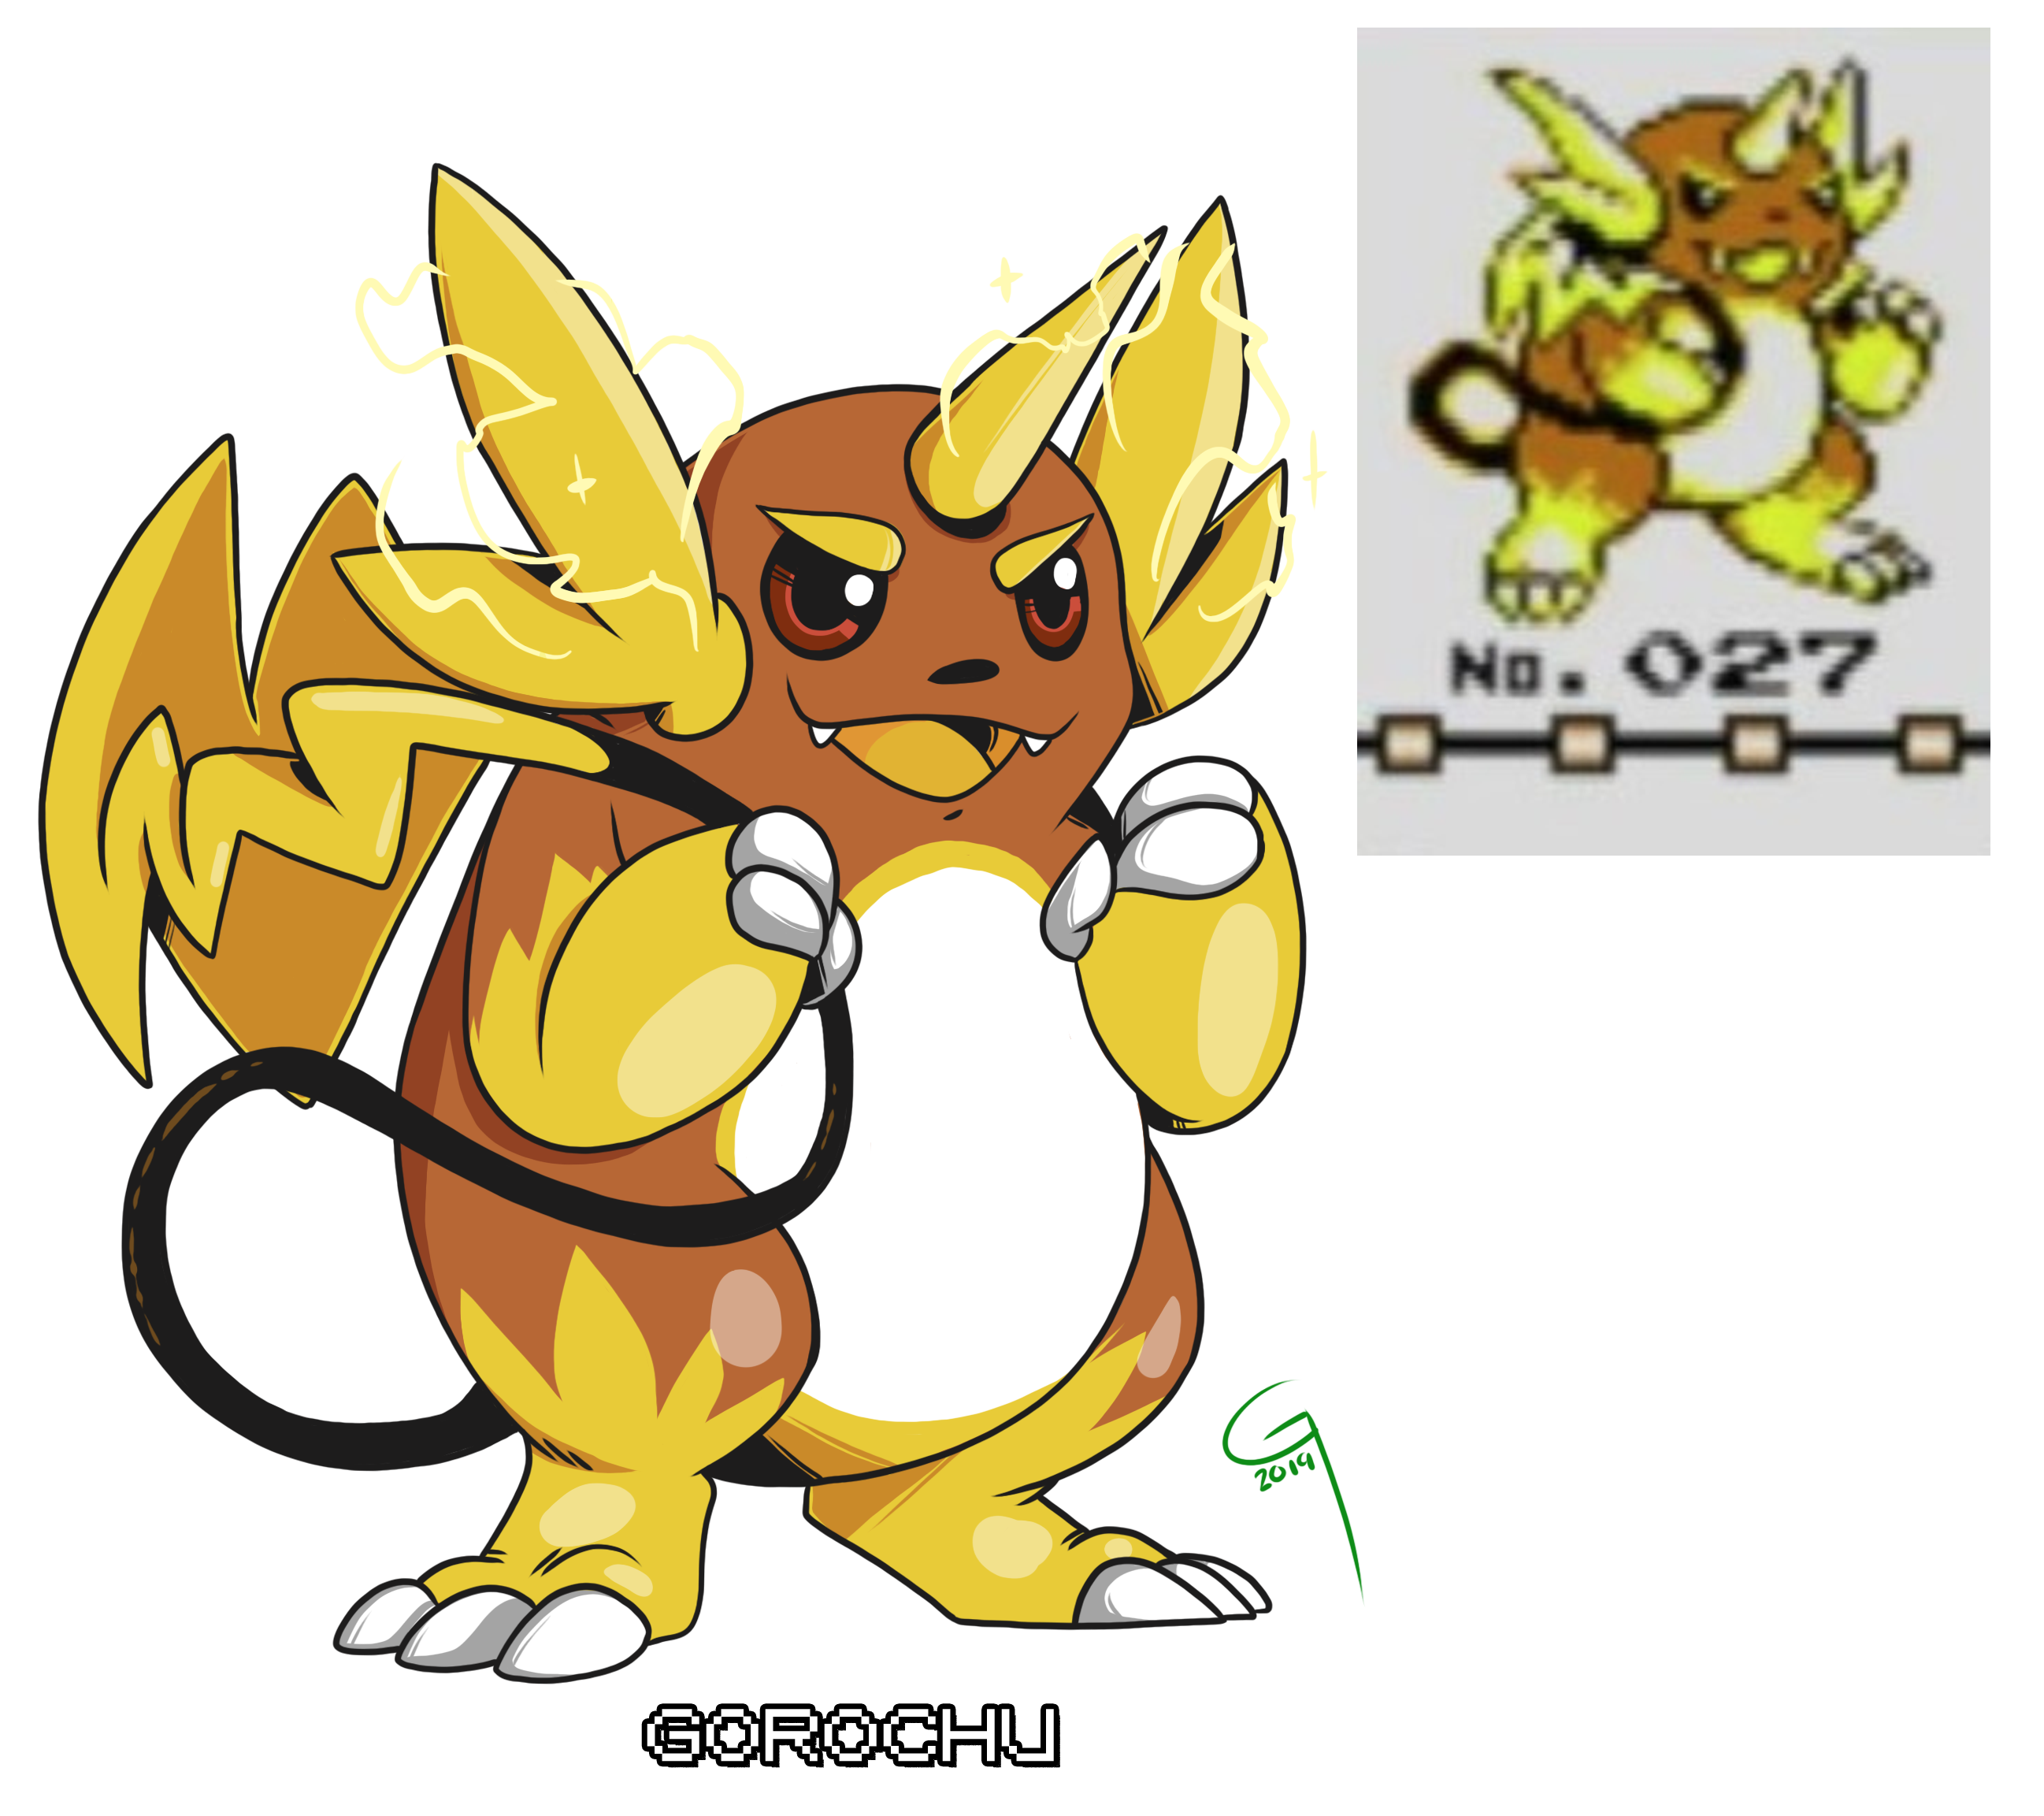 Gorochu another stab at drawing a beta sprite